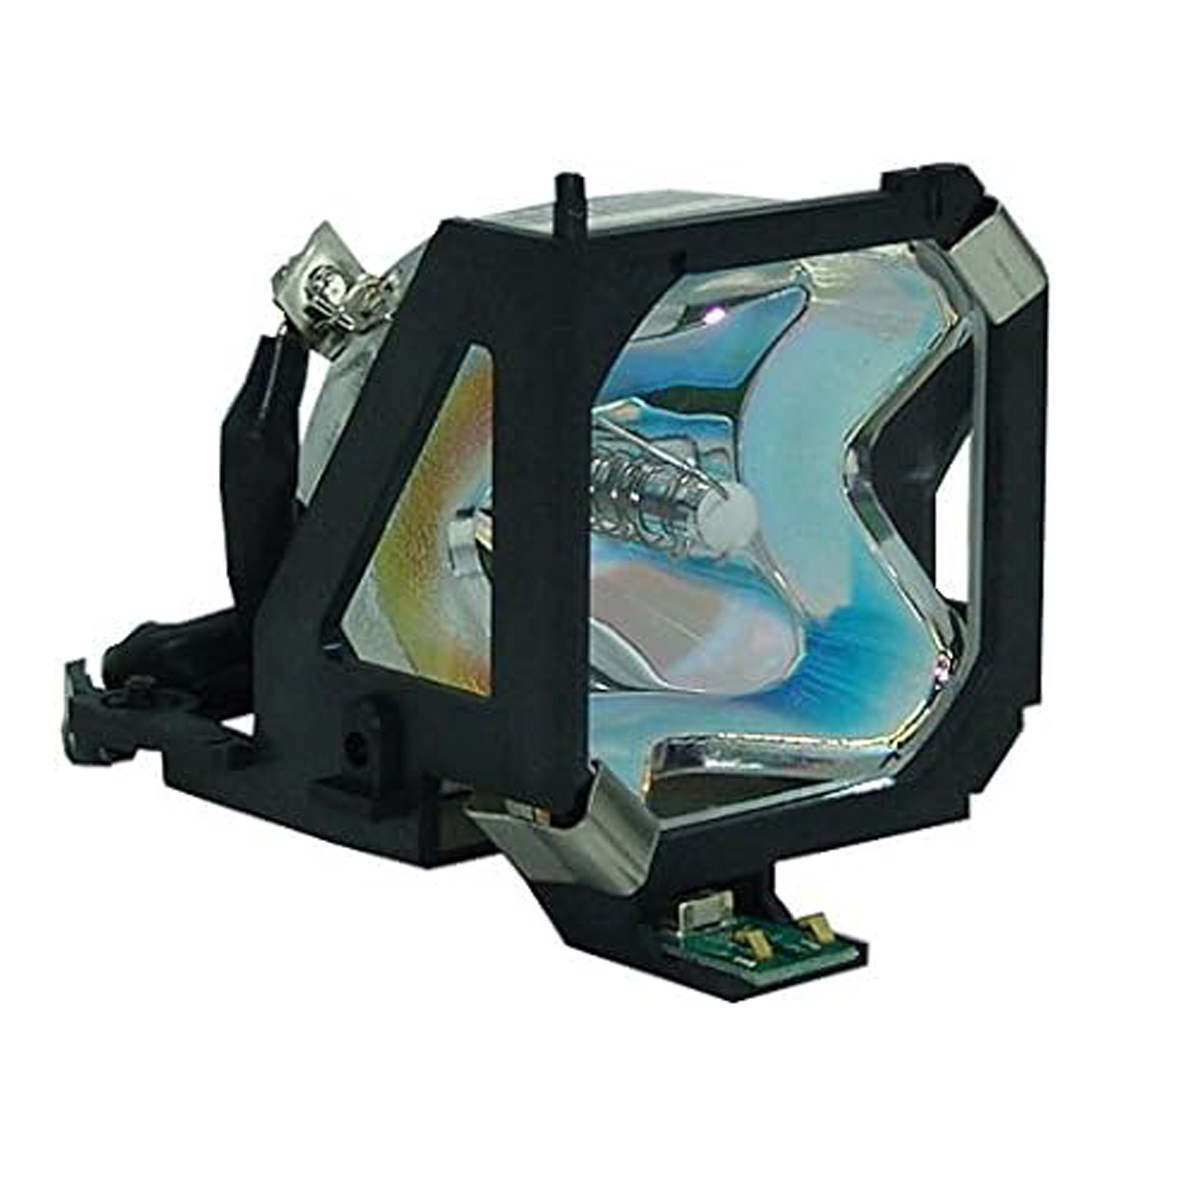 Replacement Projector lamp ELPLP14 for Epson EMP-503 EMP -505 EMP-703 EMP-713